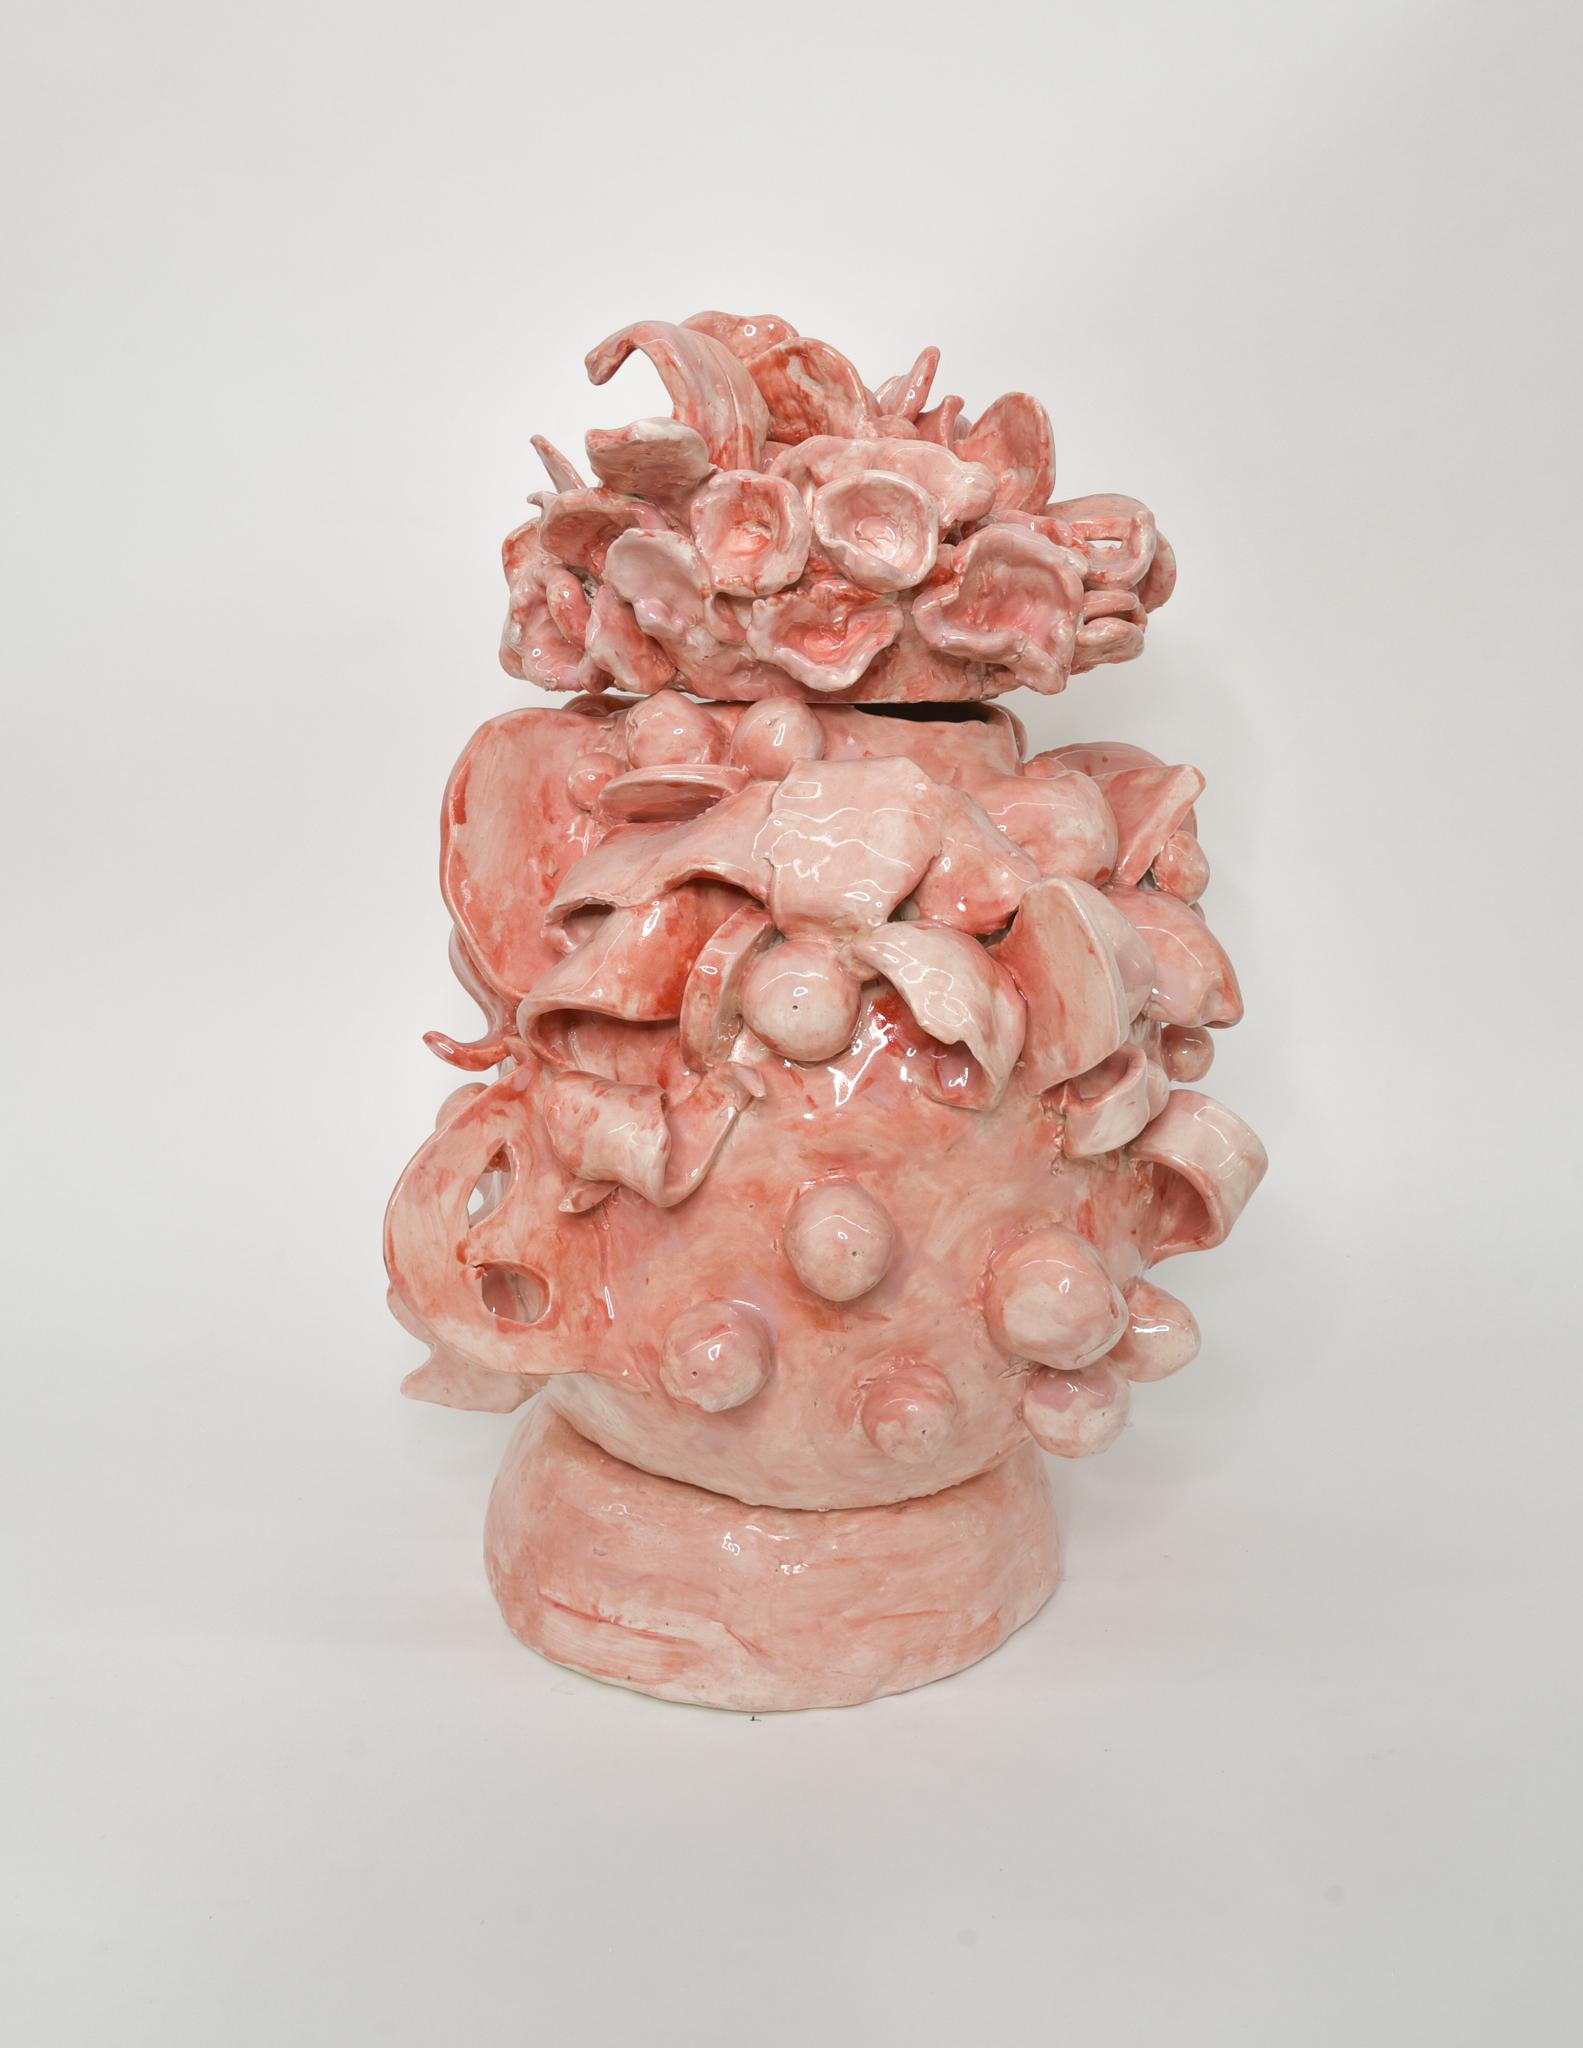 Untitled VII, by Charo Oquet
Ceramic
17. H in x 13 D in. 
2018

These gravity-defying ceramics stacked constructions struggle to soar beyond the boundaries of the spaces that contain them, often appearing to teeter in the brink of collapse. They are